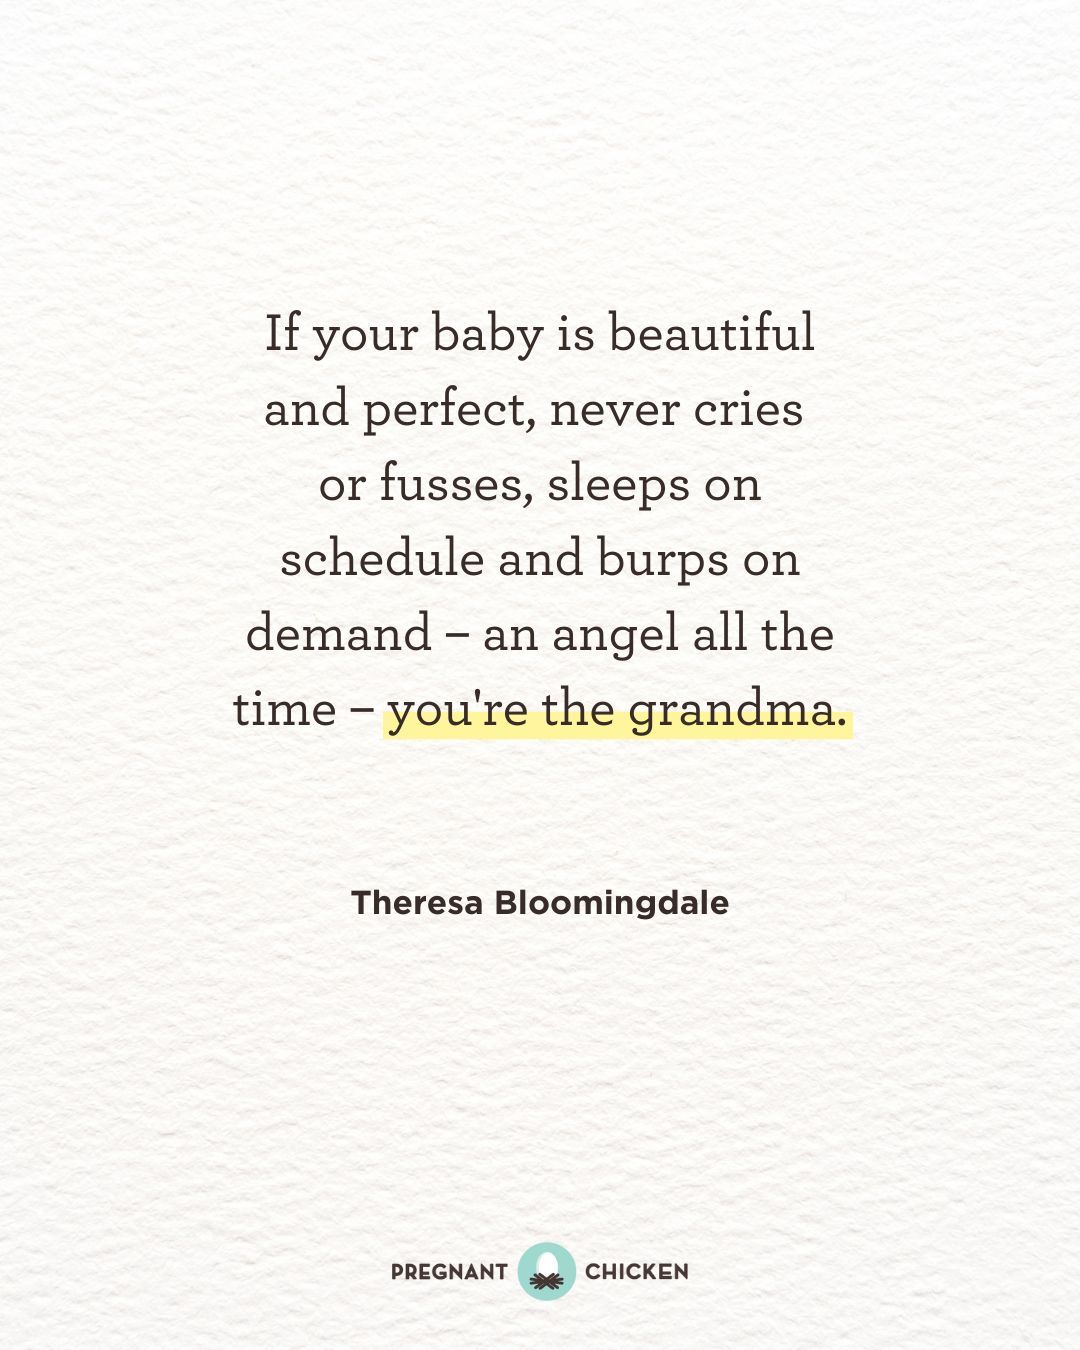 If your baby is beautiful and perfect, never cries  or fusses, sleeps on schedule and burps on demand – an angel all the time – you're the grandma.